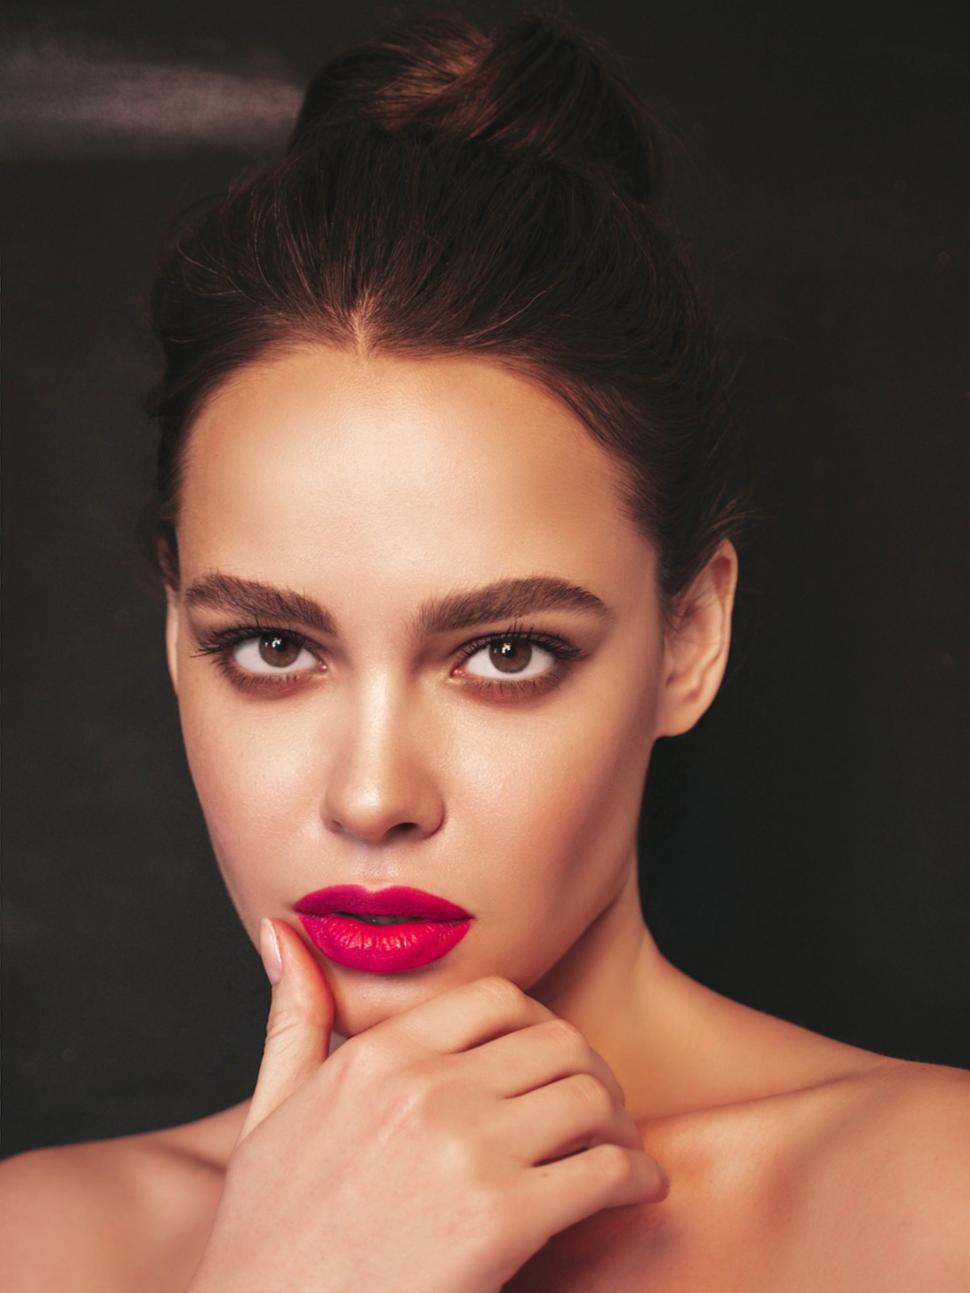 Free Image of A woman with red lipstick 